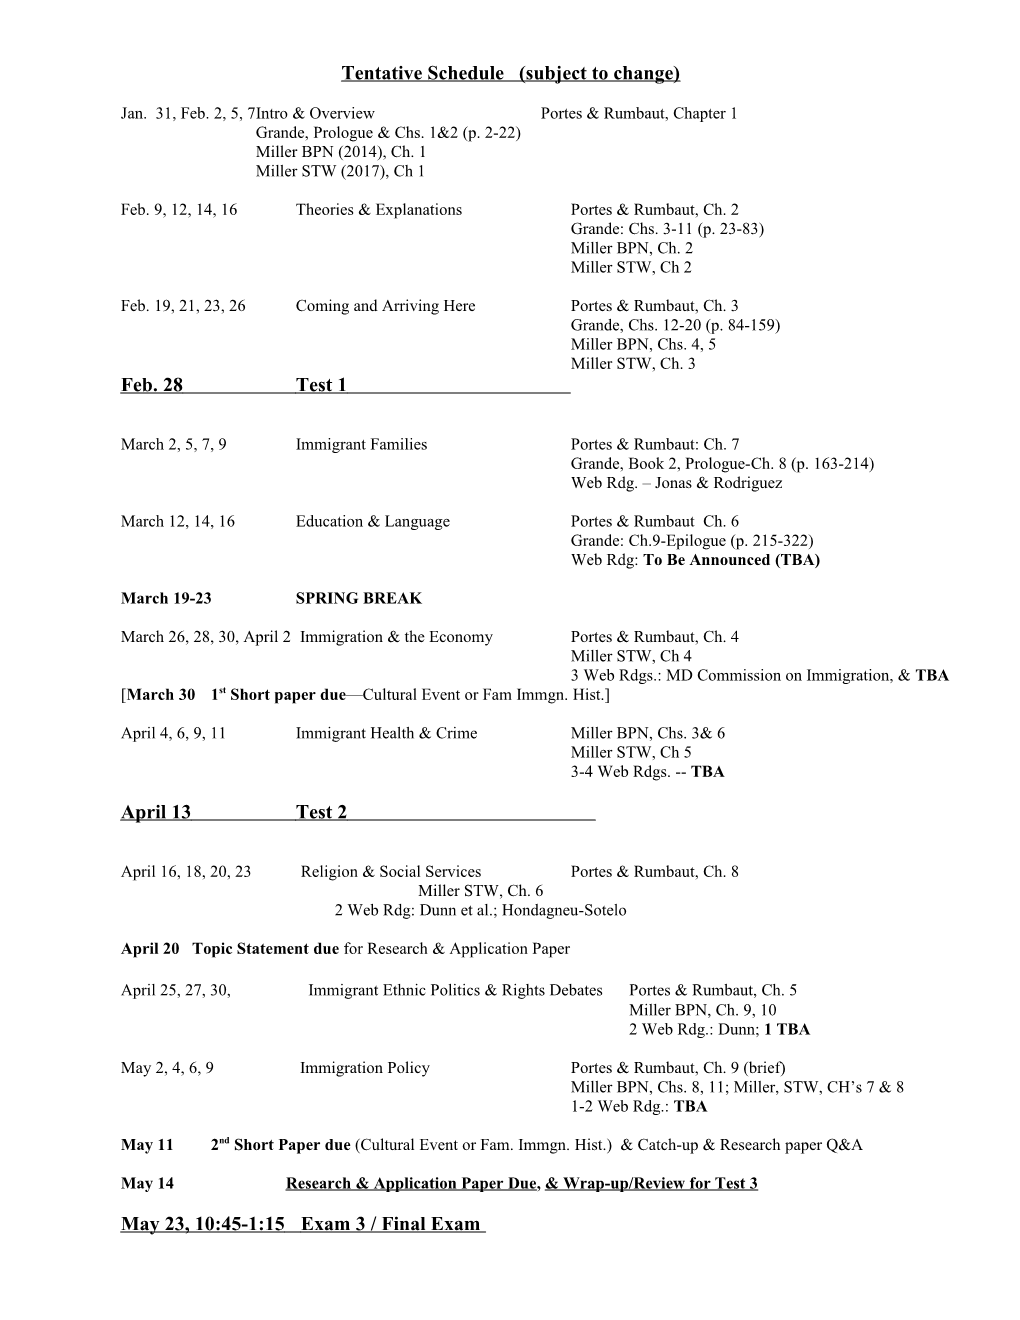 Schedule (Subject to Change)